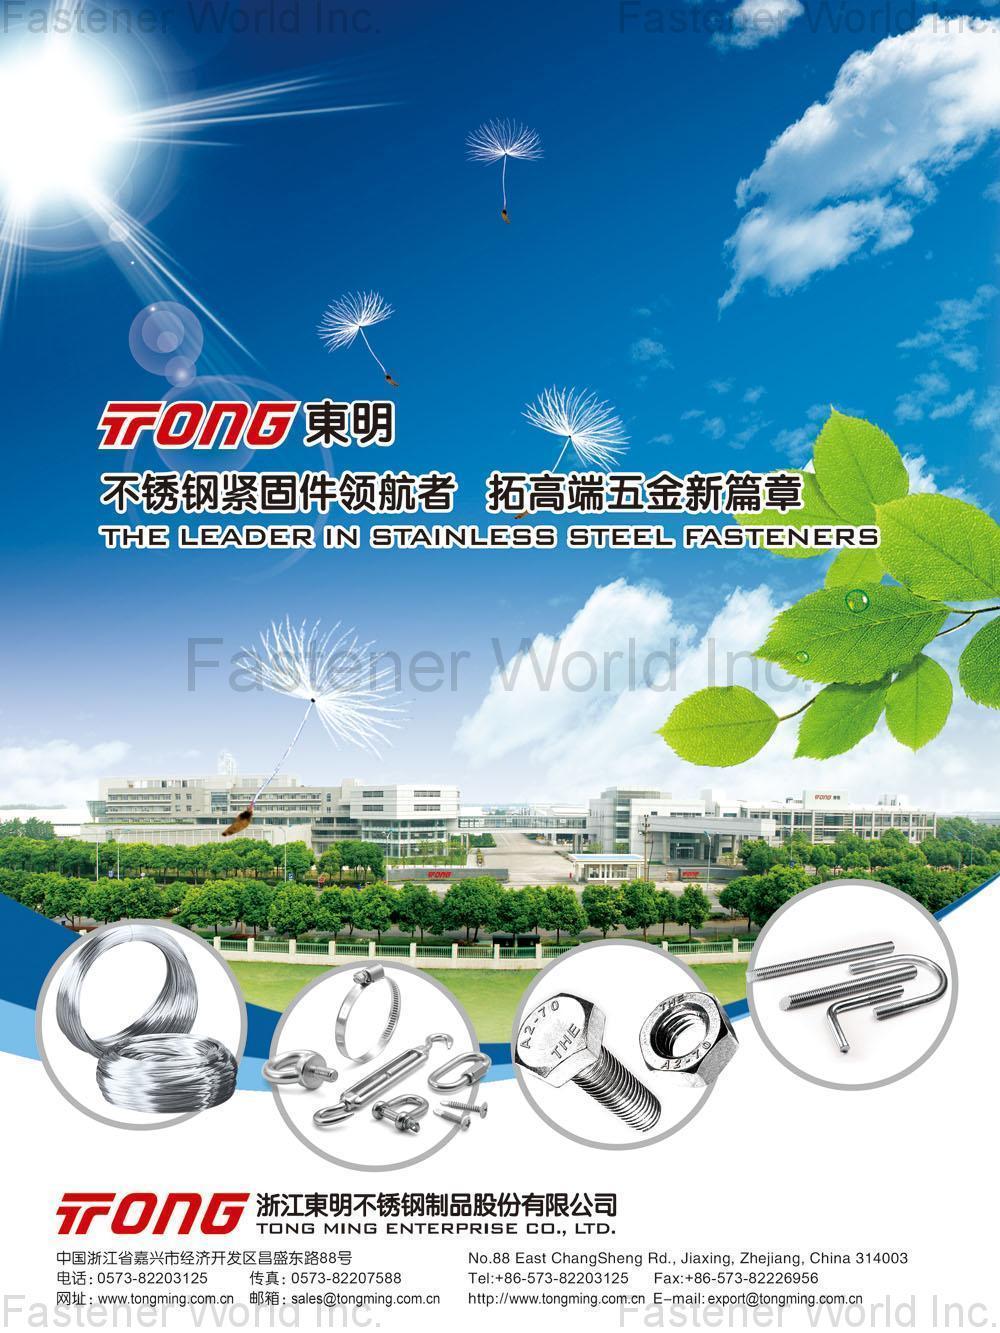 TONG MING ENTERPRISE CO., LTD.  , Stainless Steel Fasteners